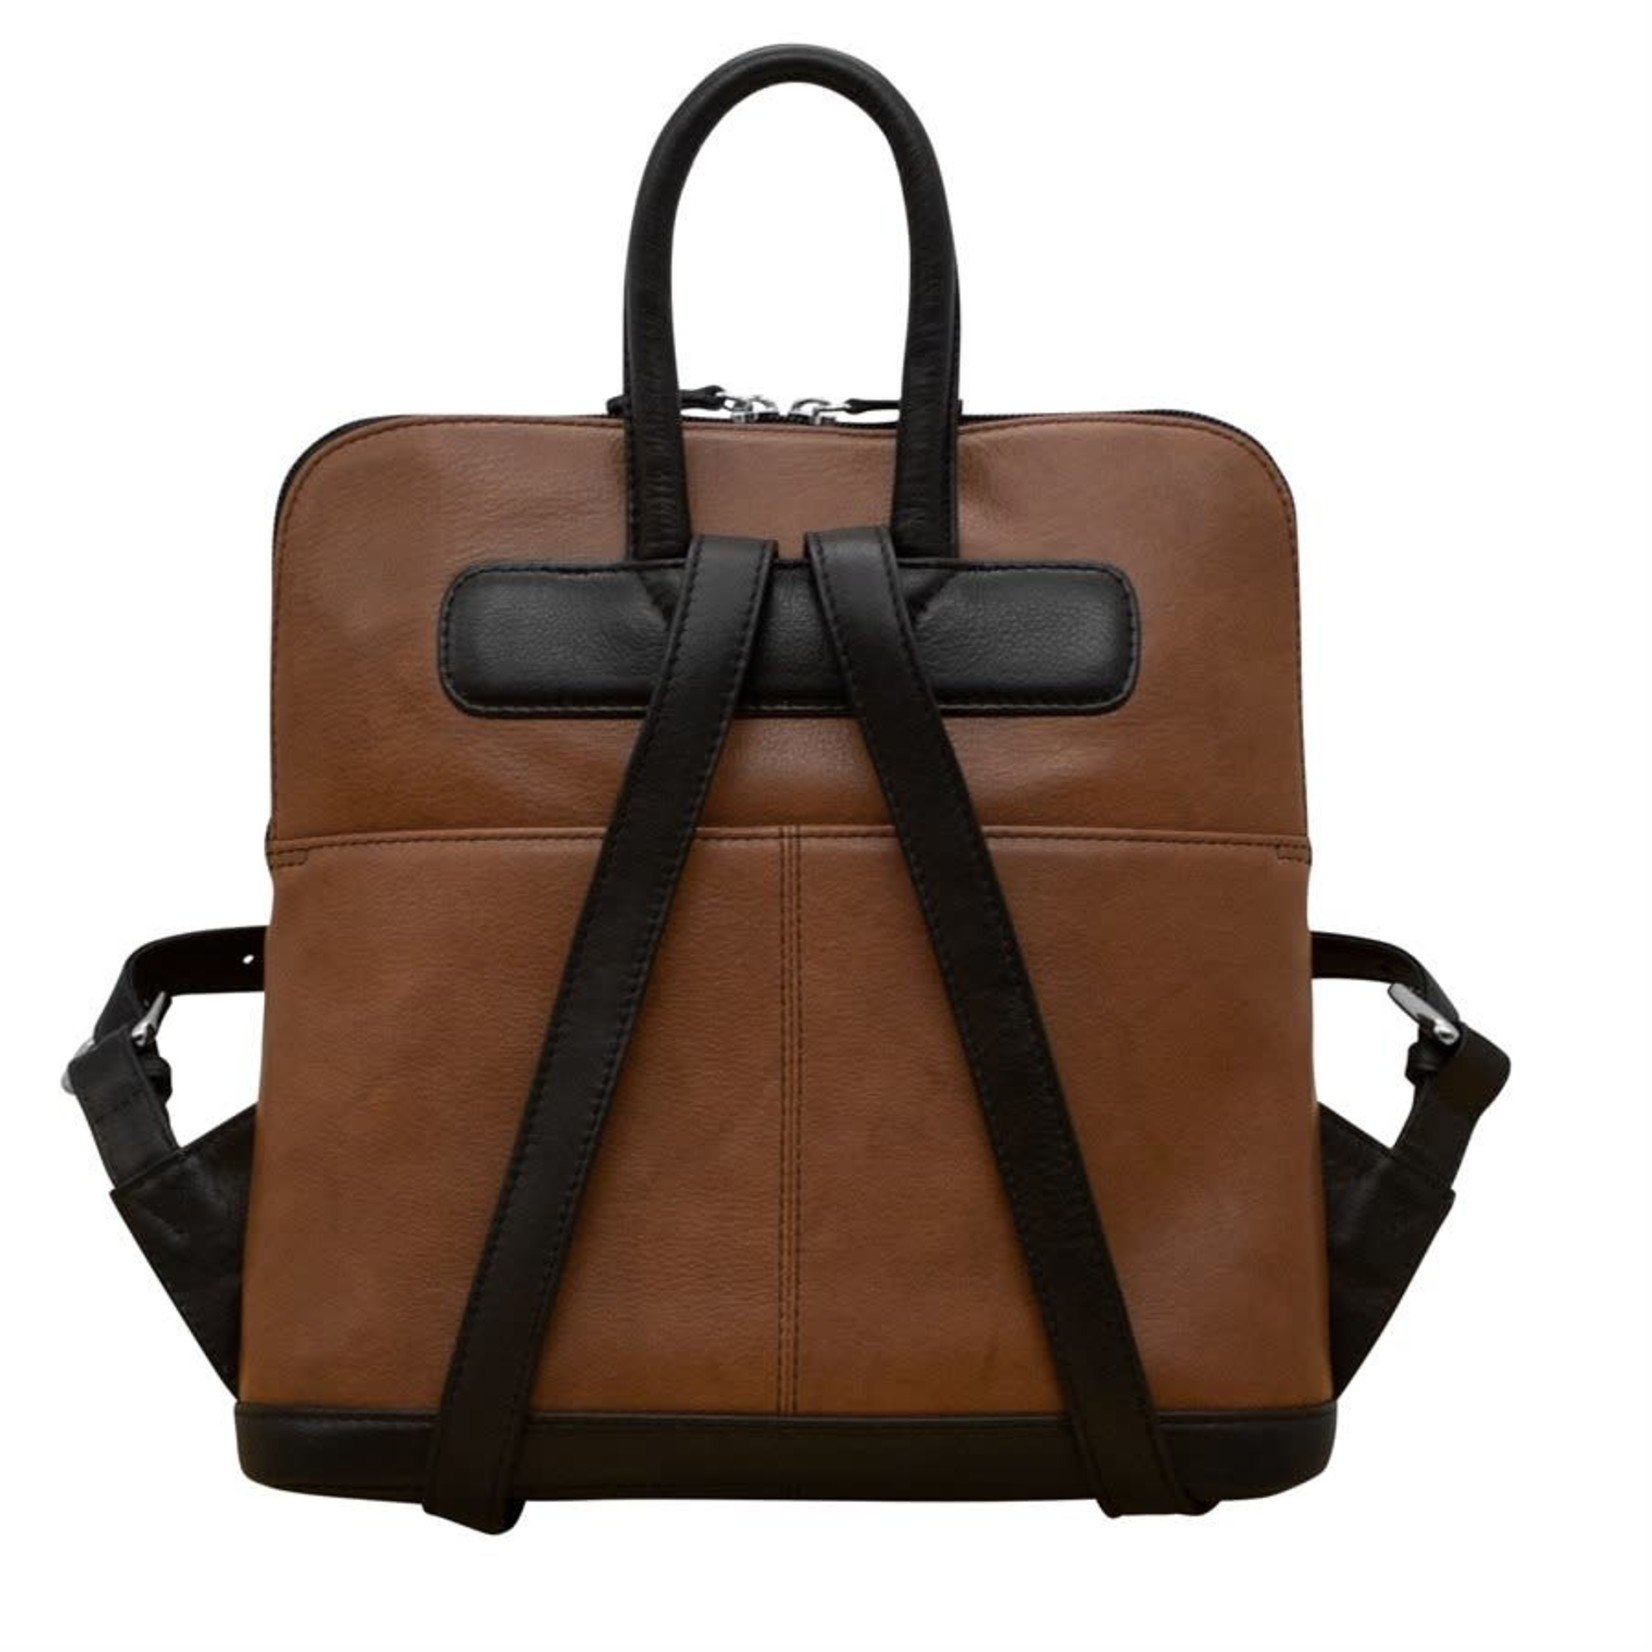 Leather Handbags and Accessories 6503 Toffee/Black - Small Backpack